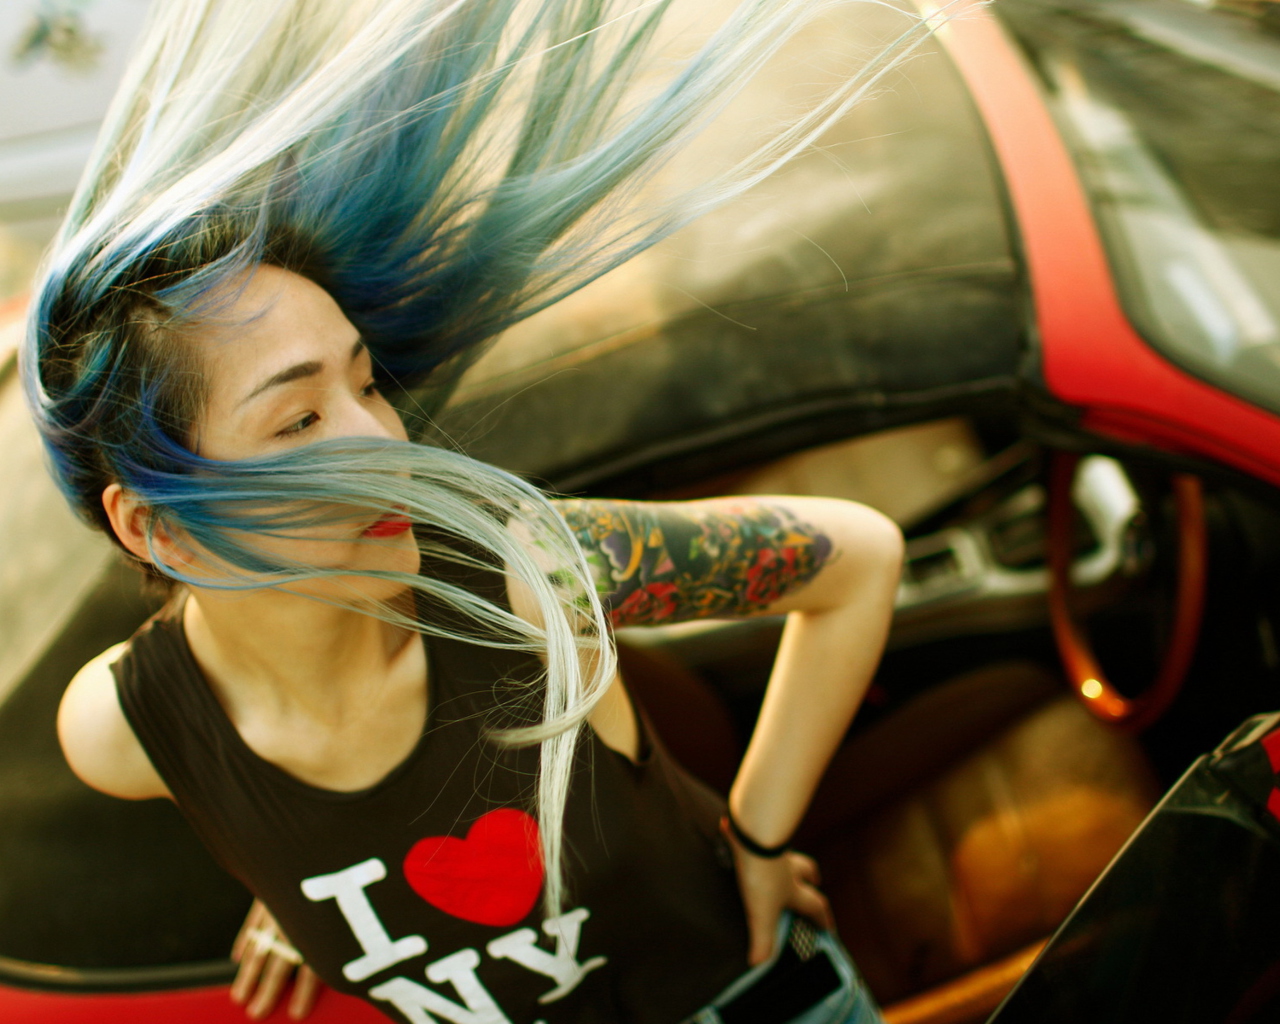 Cool Asian Girl With Blue Hair & I Love NY T-shirt wallpaper 1280x1024